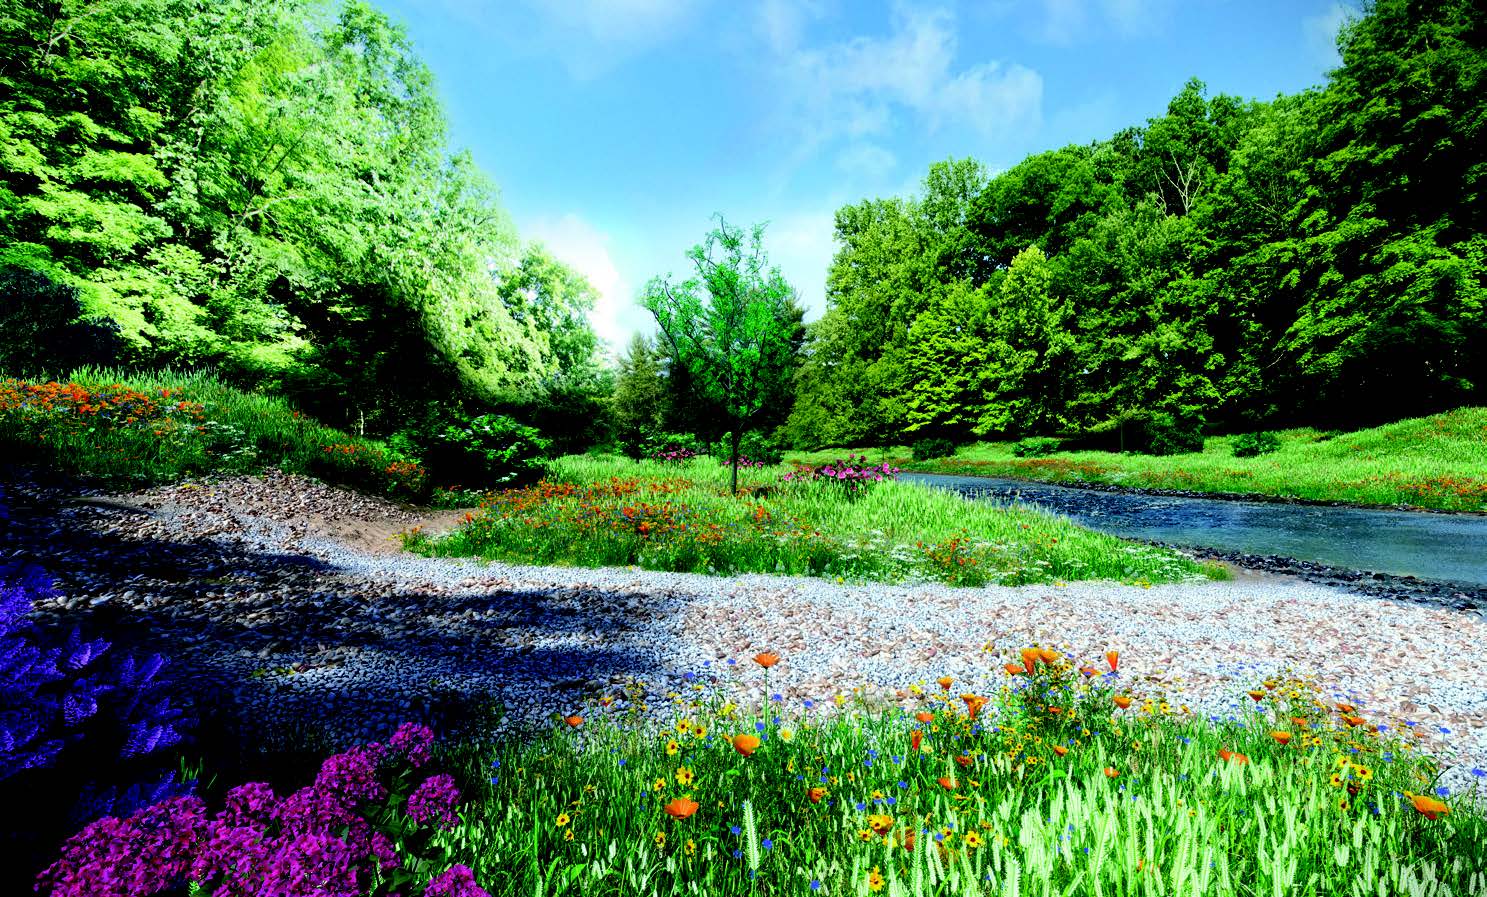 A rendering of what the Norwalk River will look like in Wilton, CT after the Strong Pond Dam is removed and the riverbanks are restored. Save the Sound image